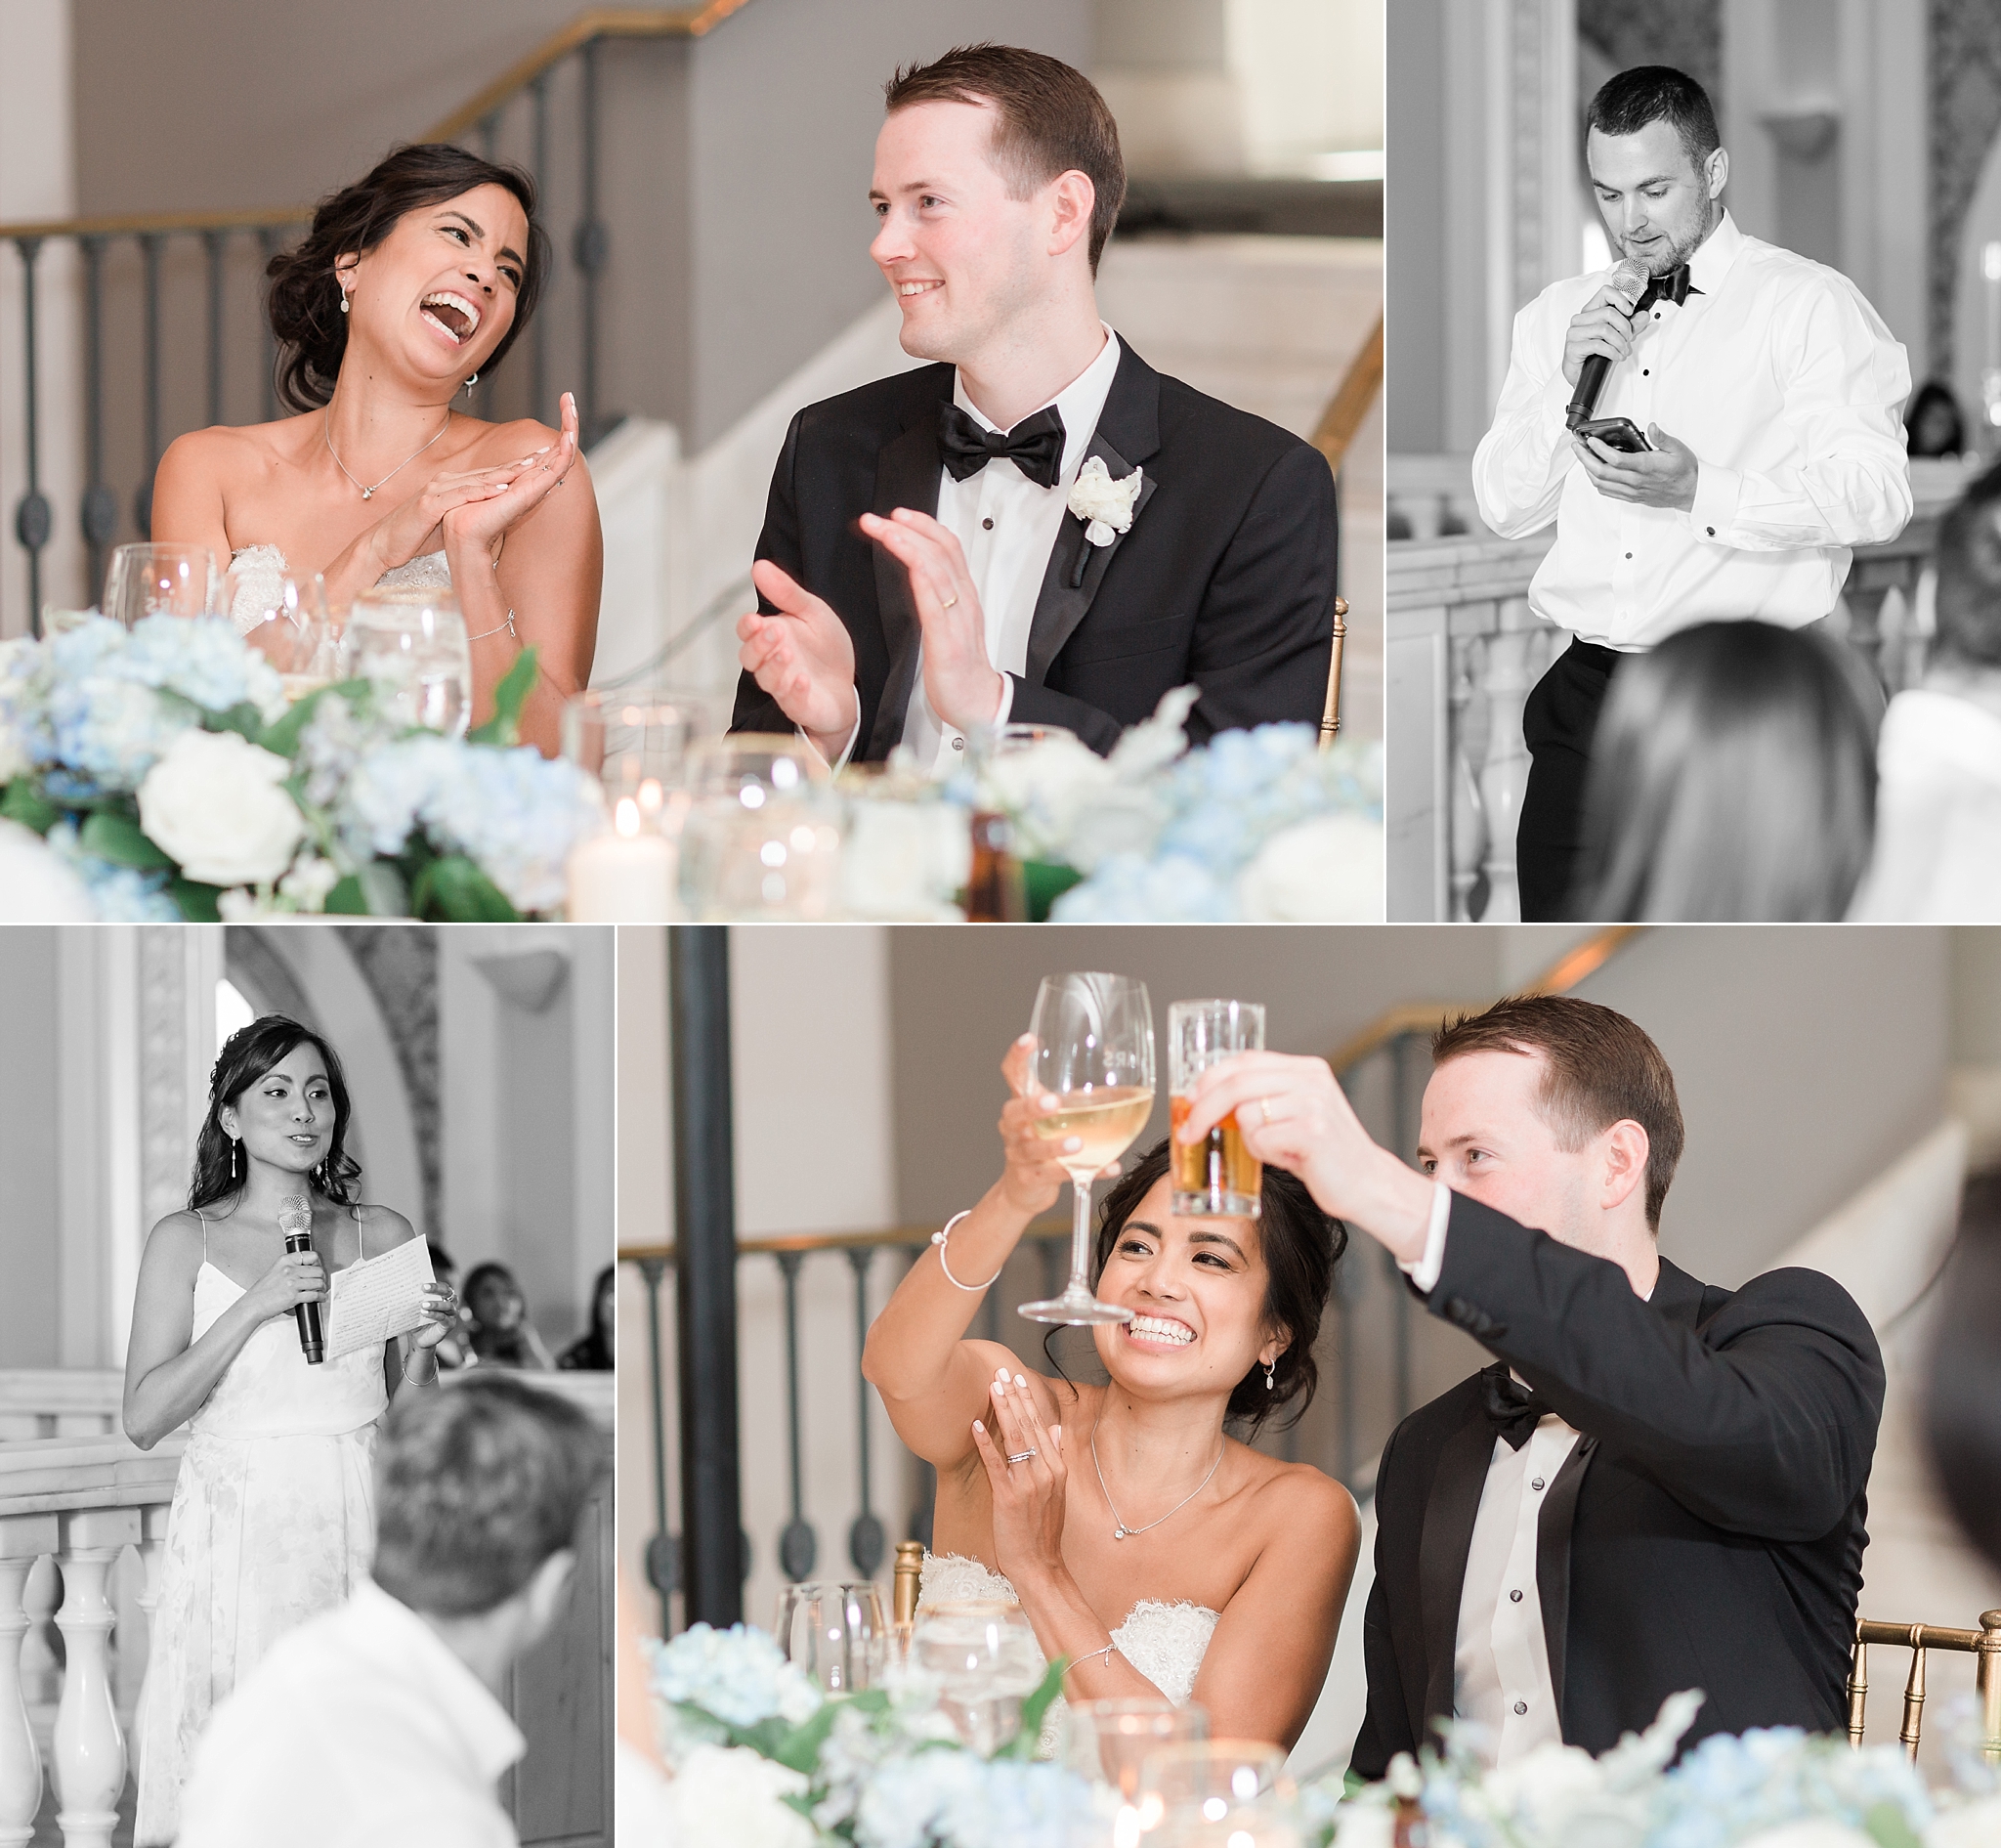 This sweet couple was married in a romantic ceremony ath the iconic St. Matthews Cathedral in Washington, DC and celebrated with a reception at the National Museum of Women in the Arts.